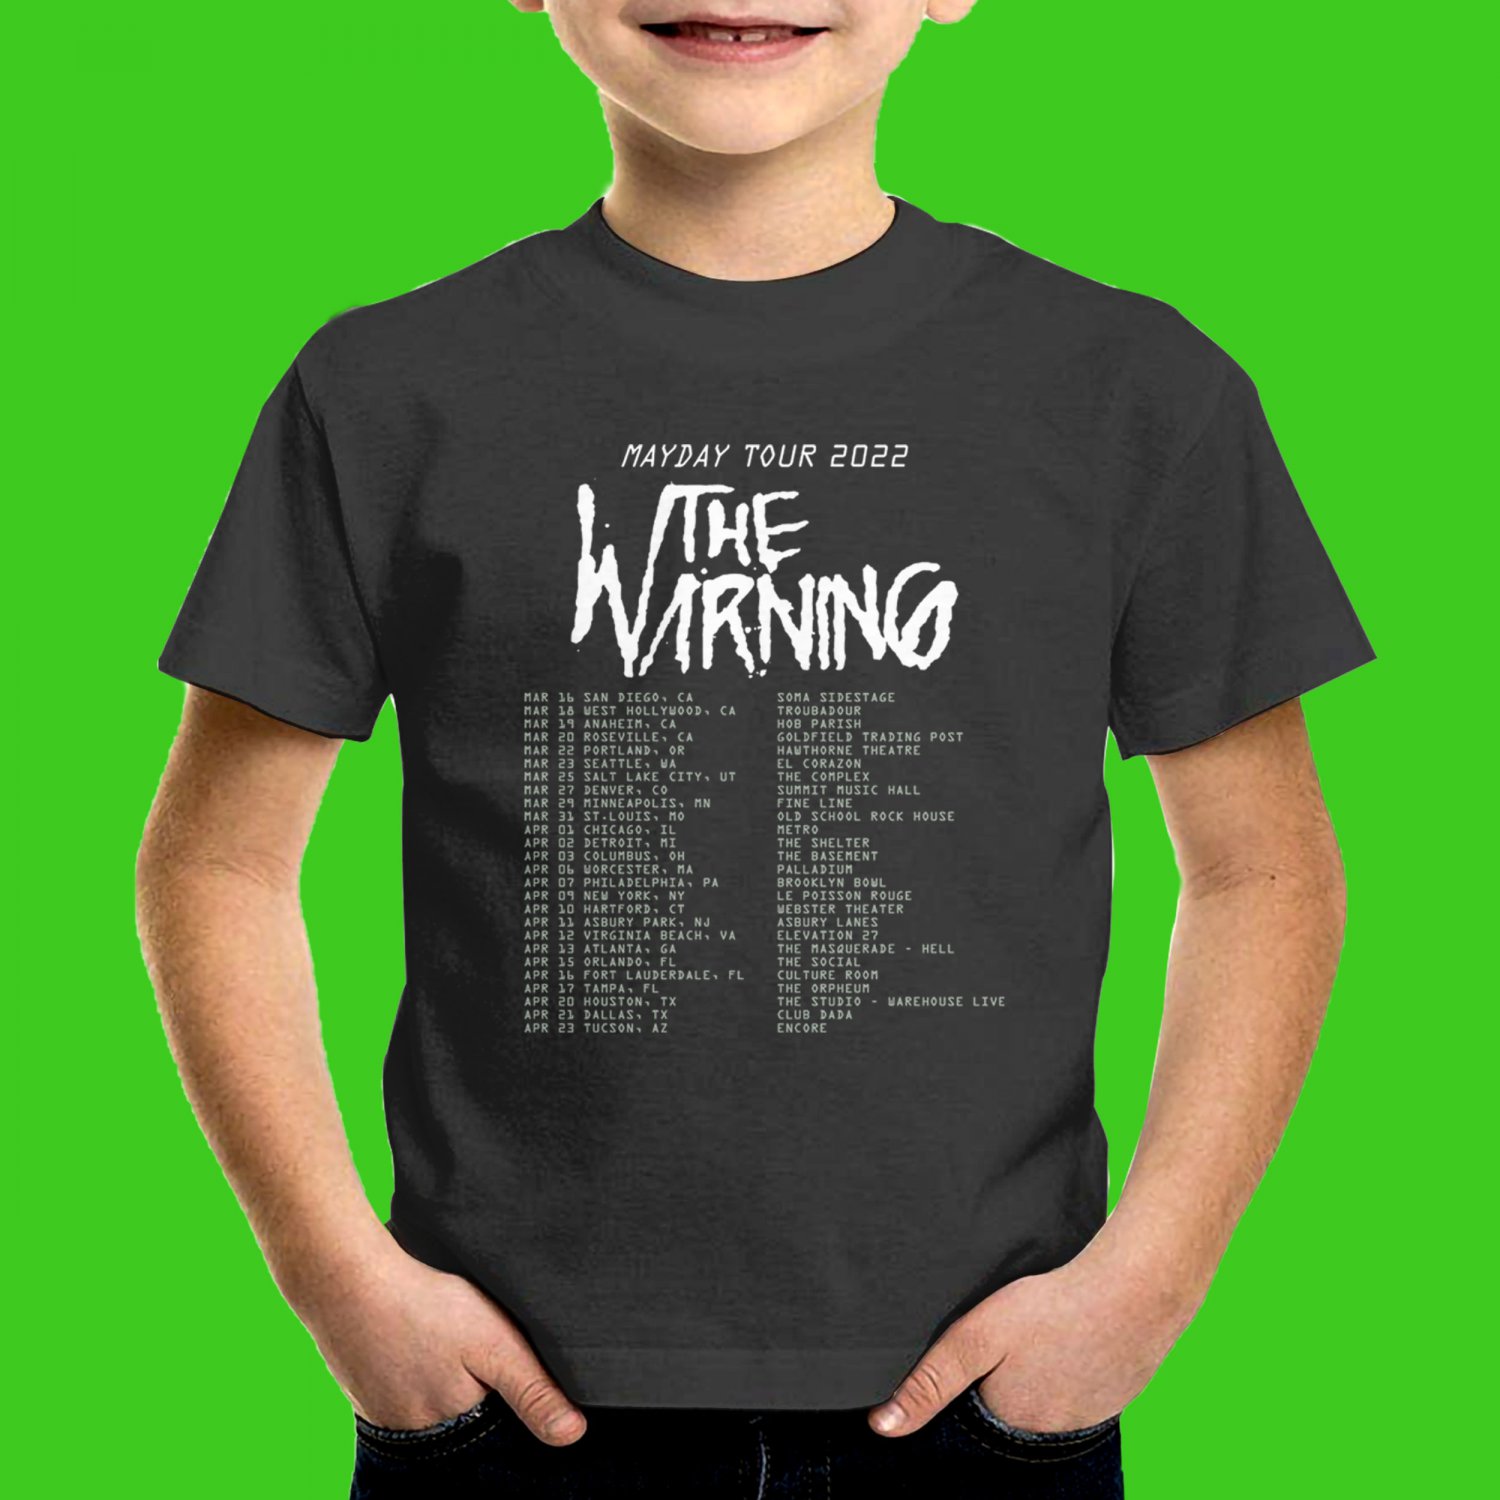 FOR KIDS THE WARNING MAYDAY TOUR DATES 2022 FRONT BLACK TEE SHIRT M01